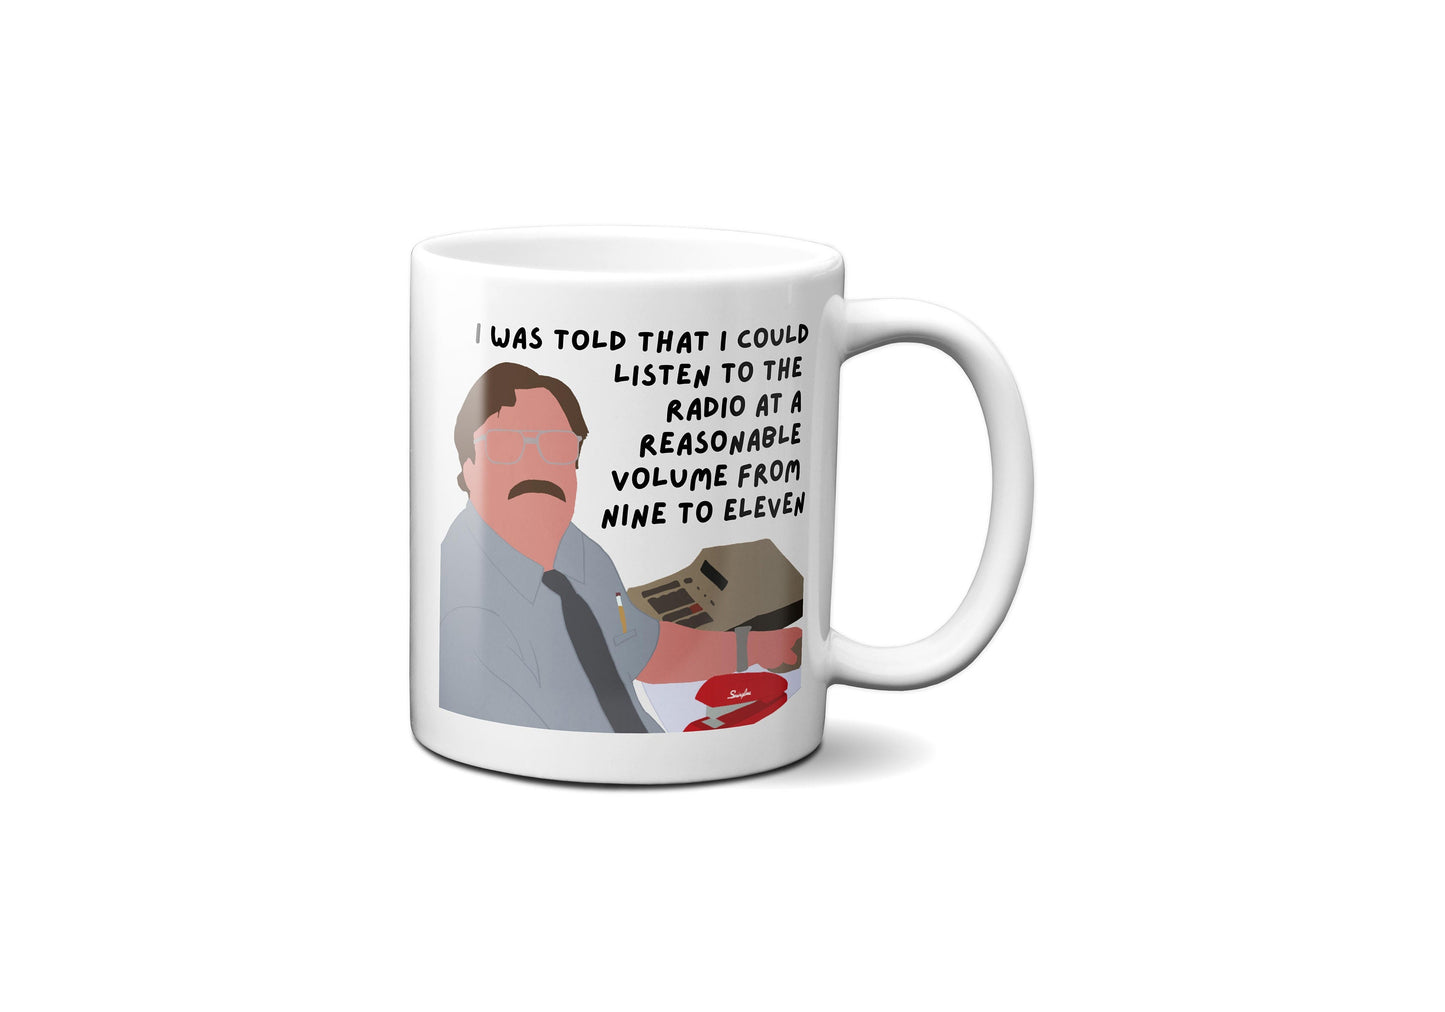 I was told that I could listen to the radio at a reasonable volume | Milton Waddams Quote Mug | Office Space Mug